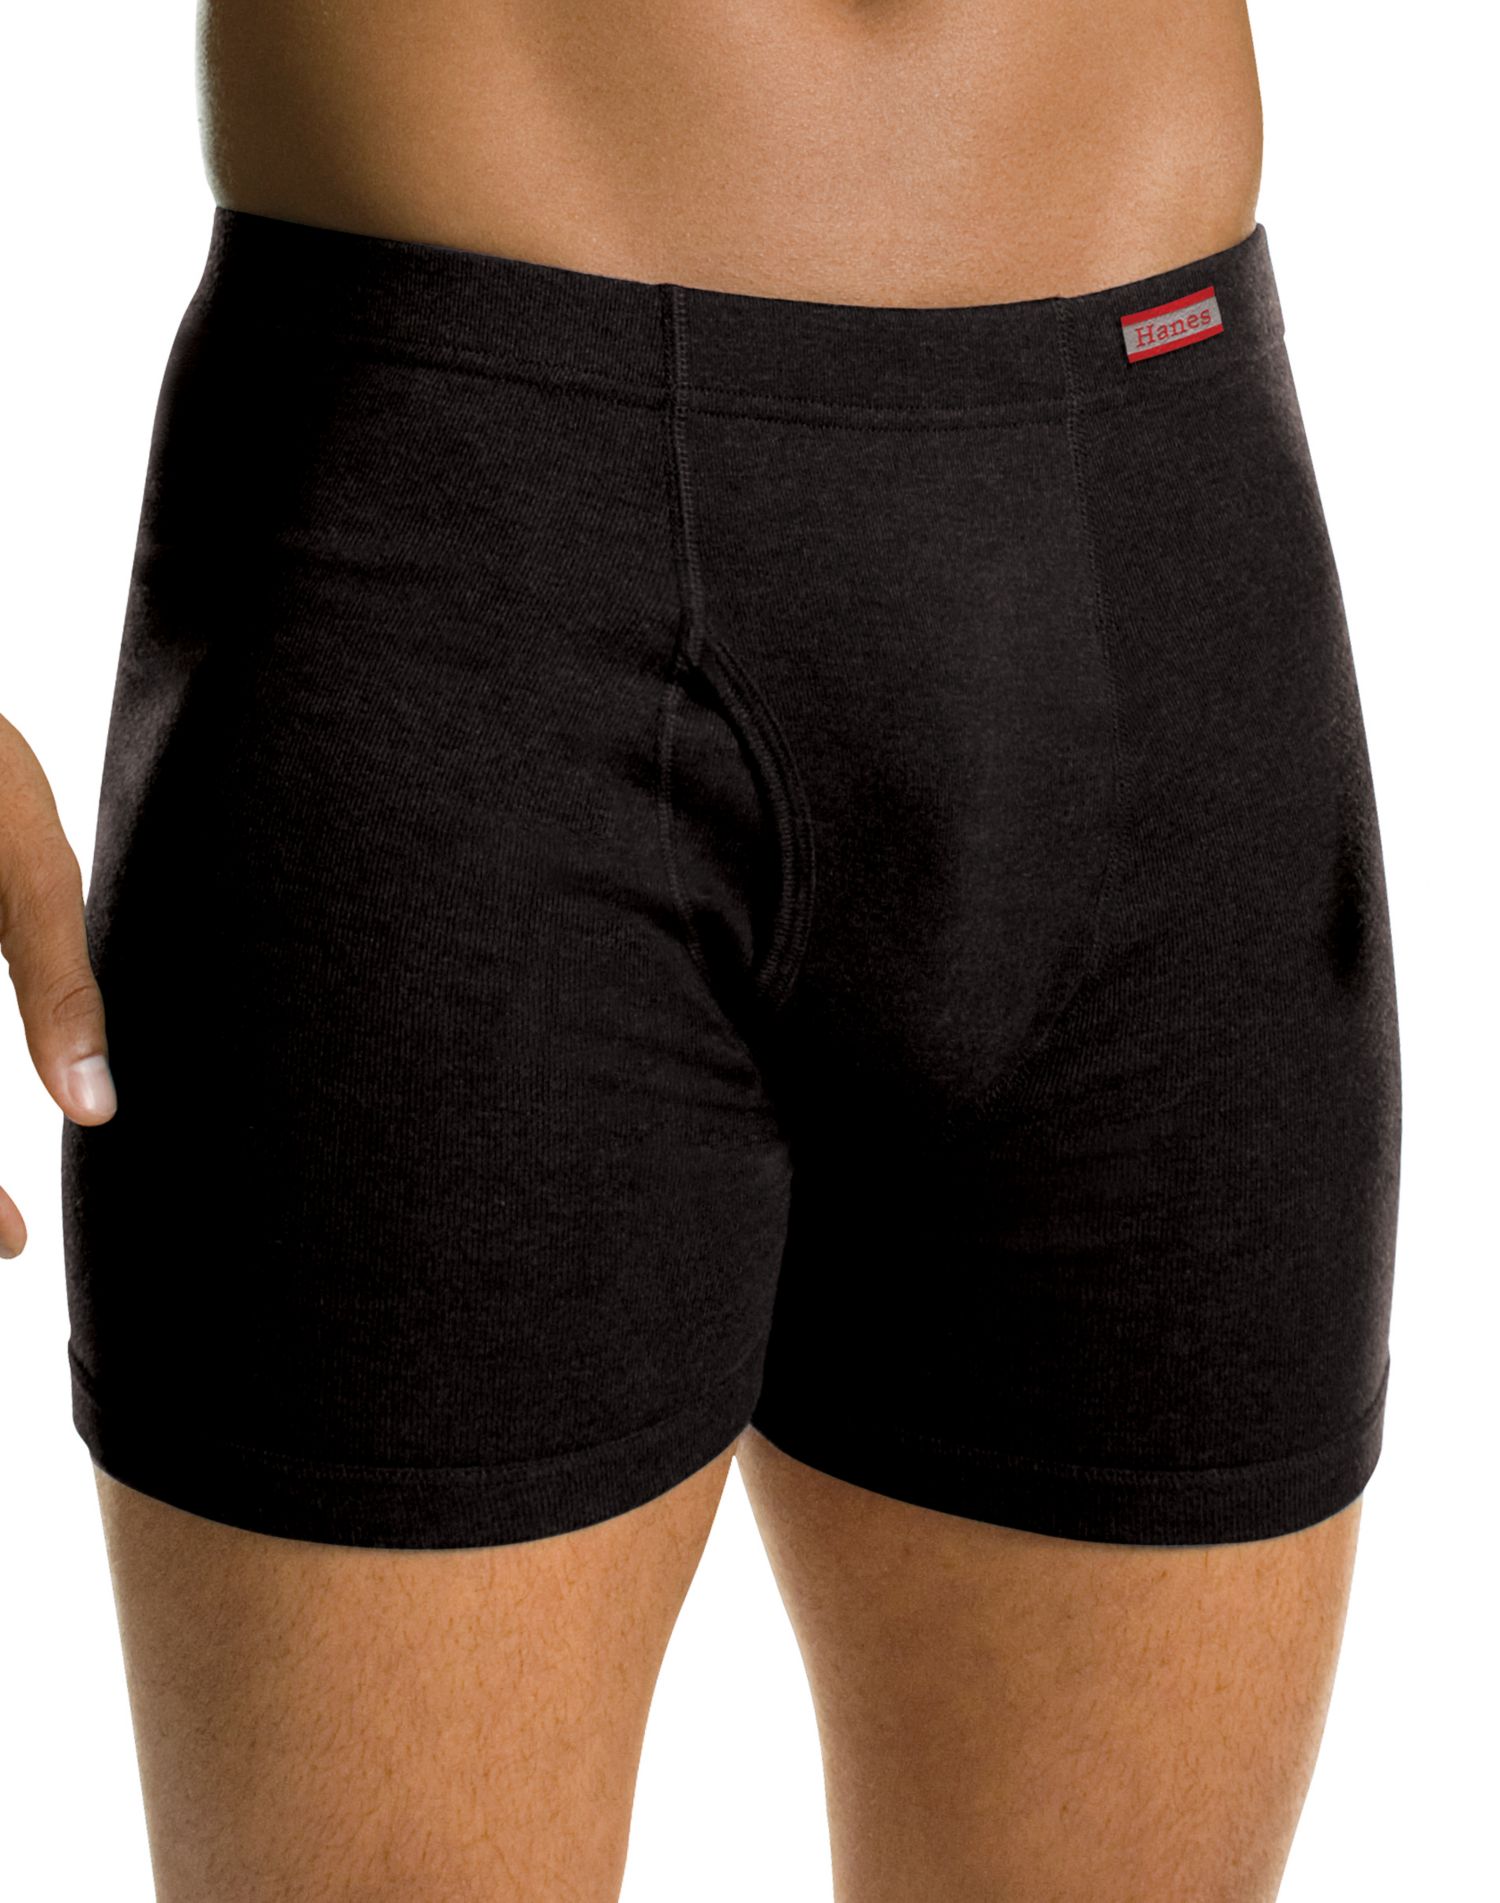 Hanes Men's Tagless Assorted Briefs with Fabric-Covered